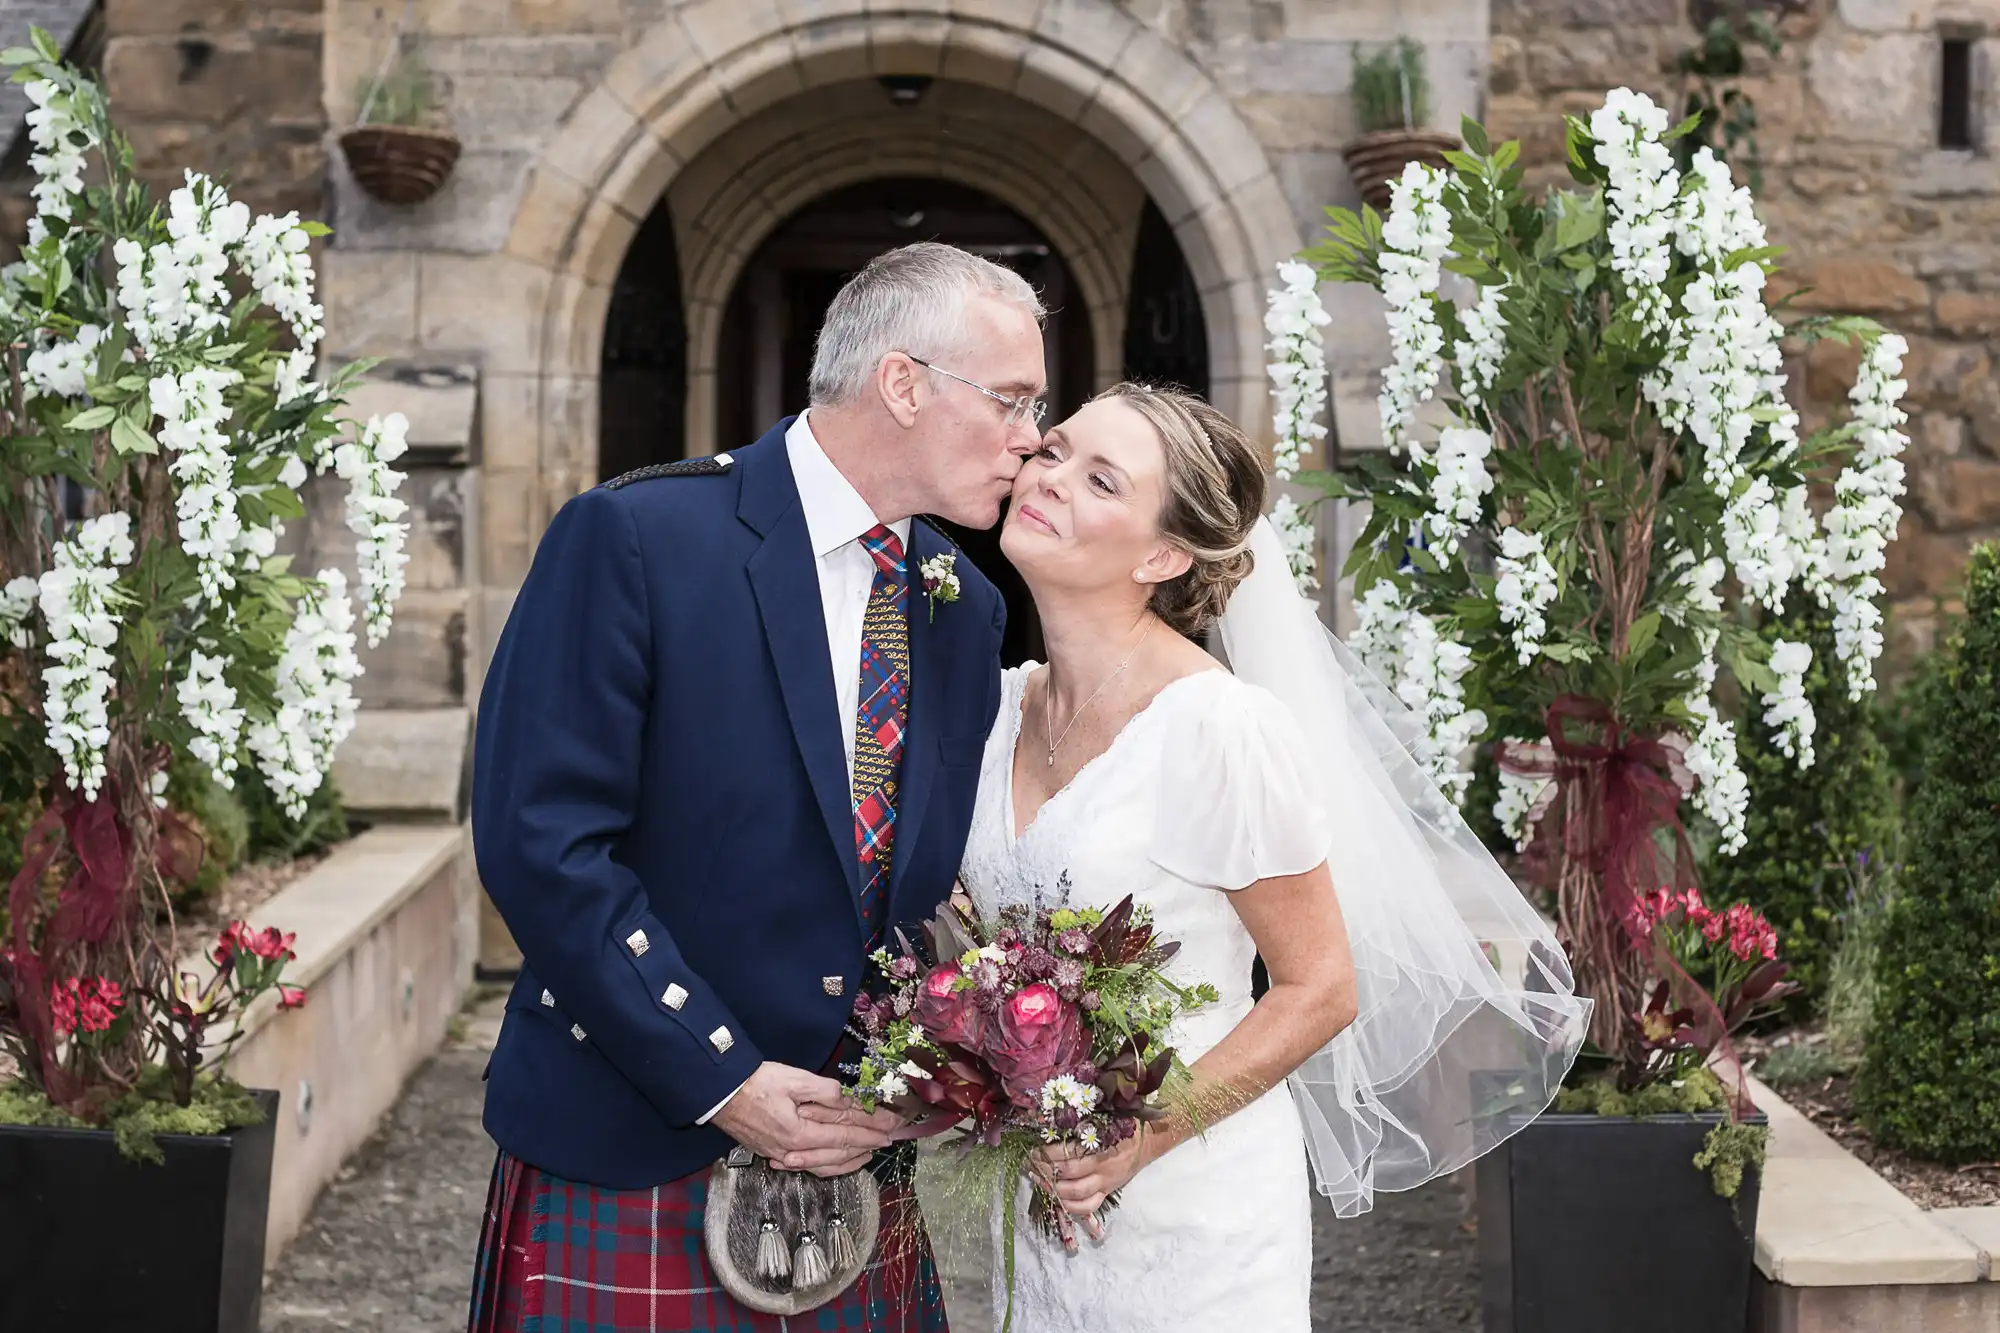 A bride and groom kissing outside a stone church, the groom in a tartan kilt and the bride in a white dress, holding a bouquet, with white floral arrangements on either side.